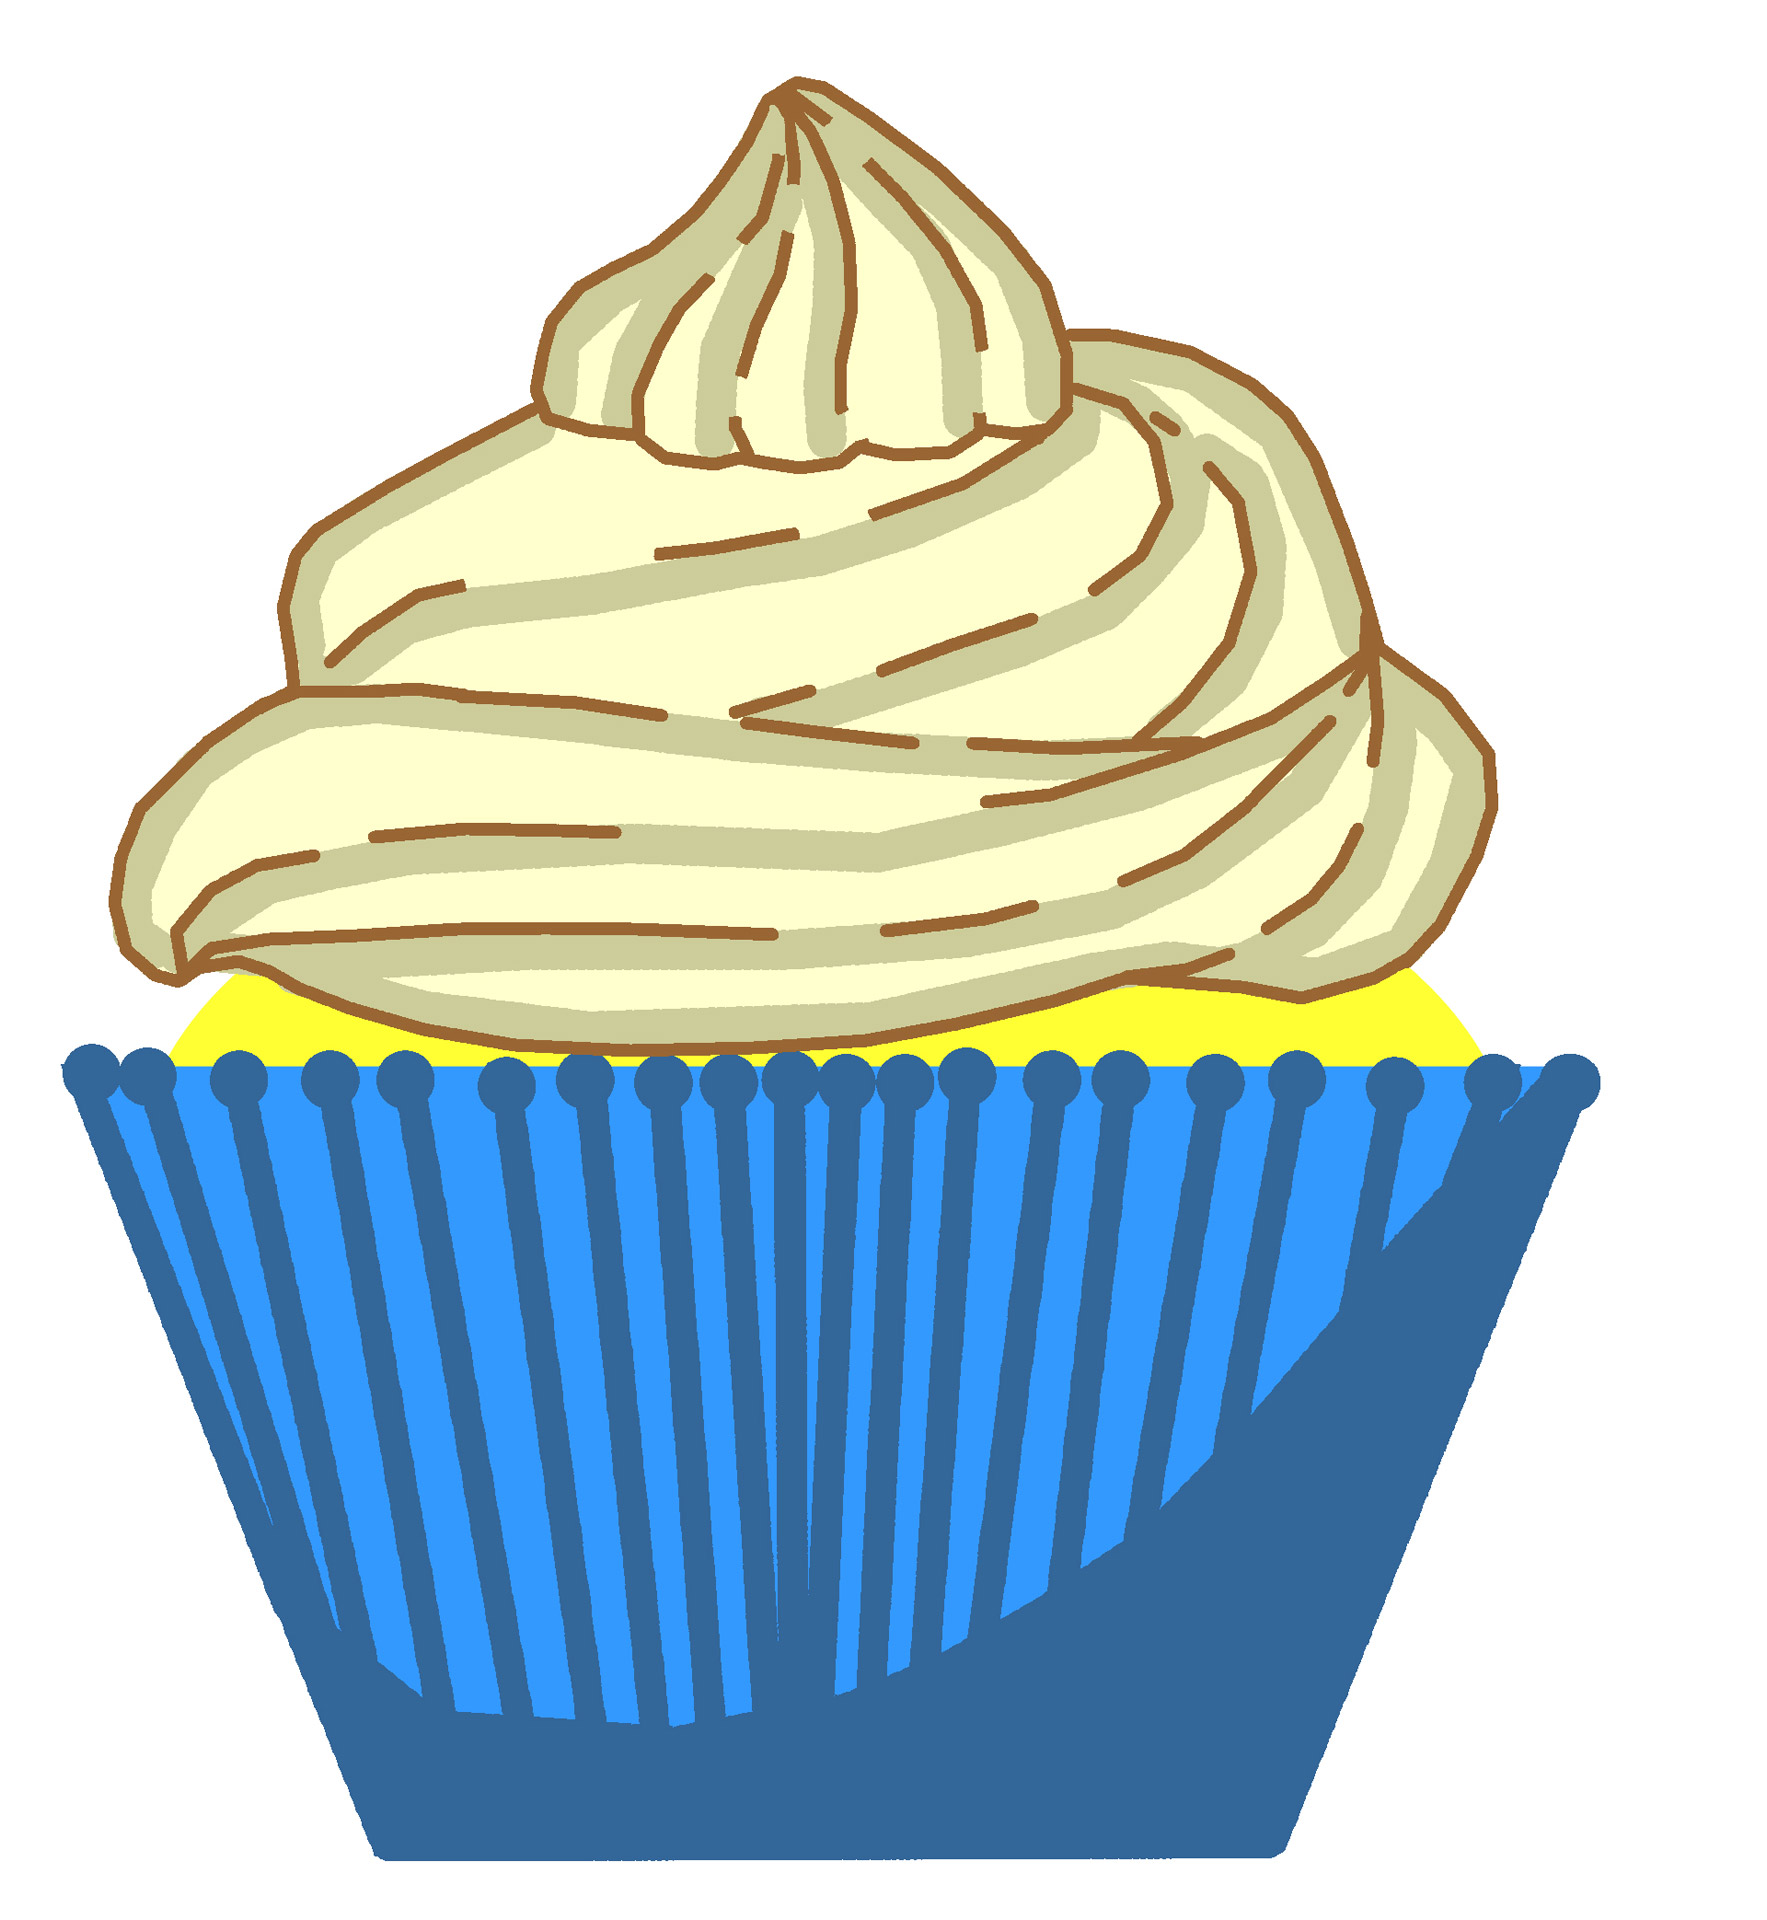 cupcake clipart free download - photo #25